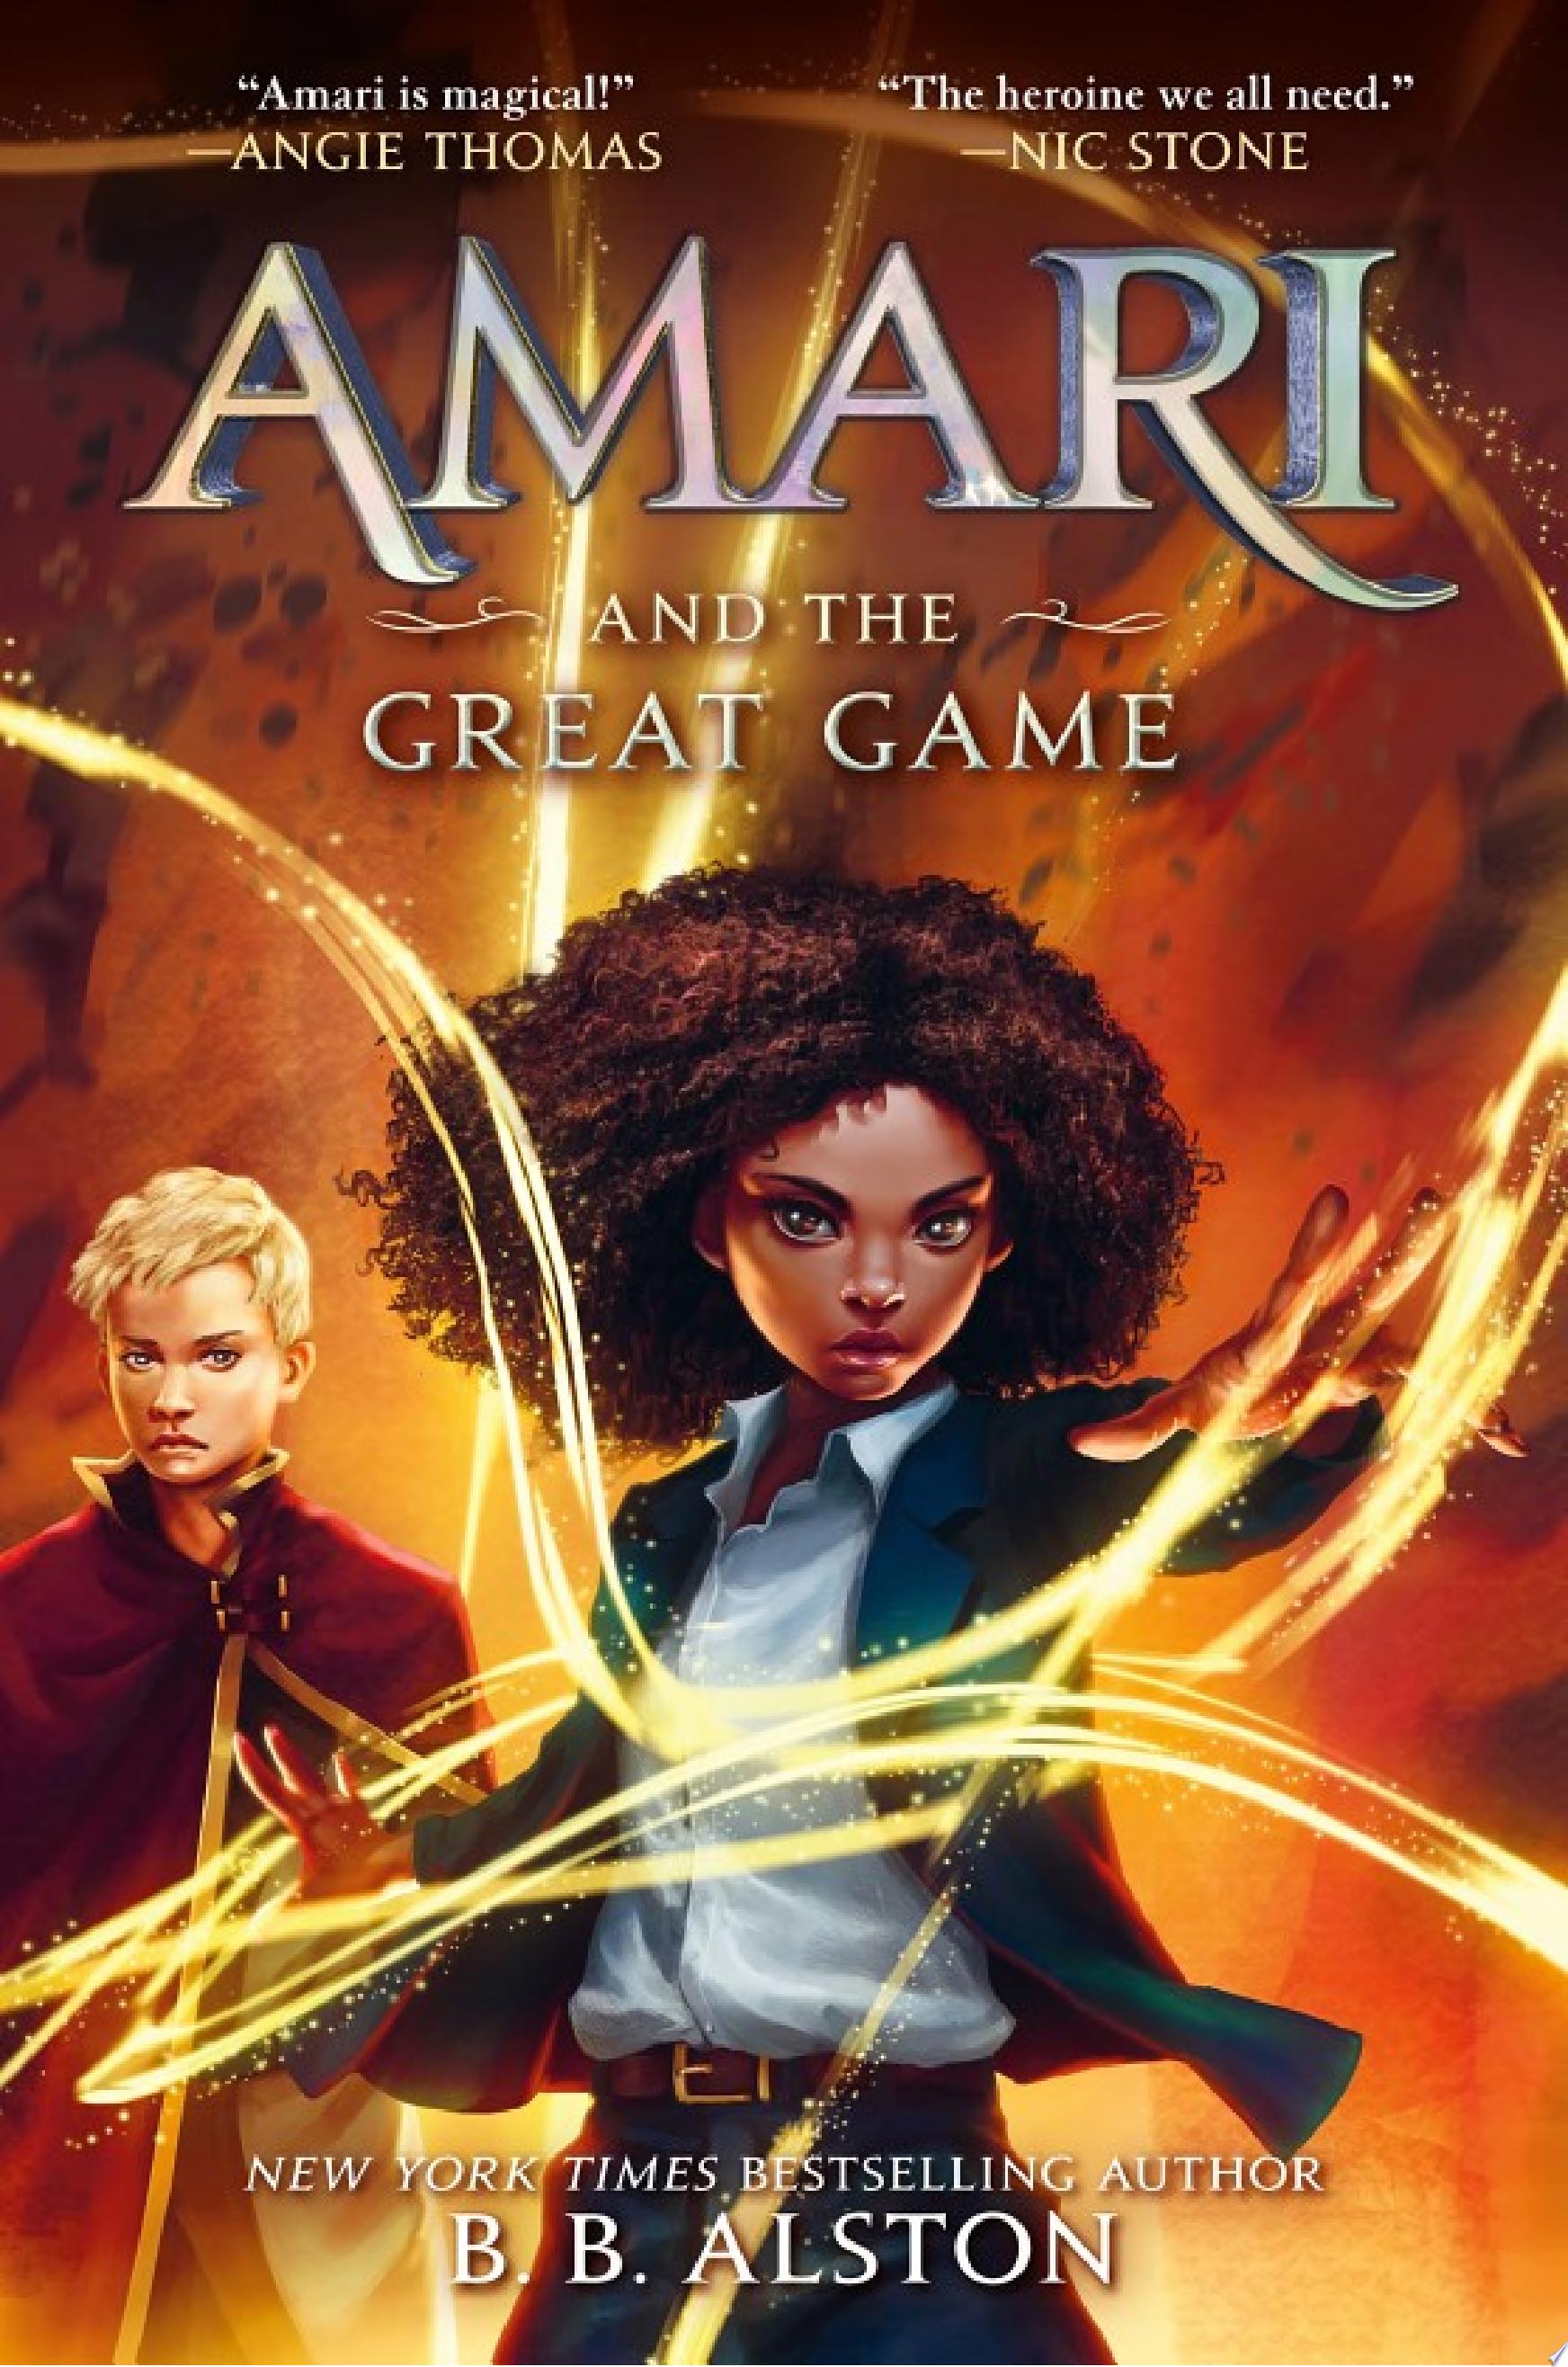 Image for "Amari and the Great Game"